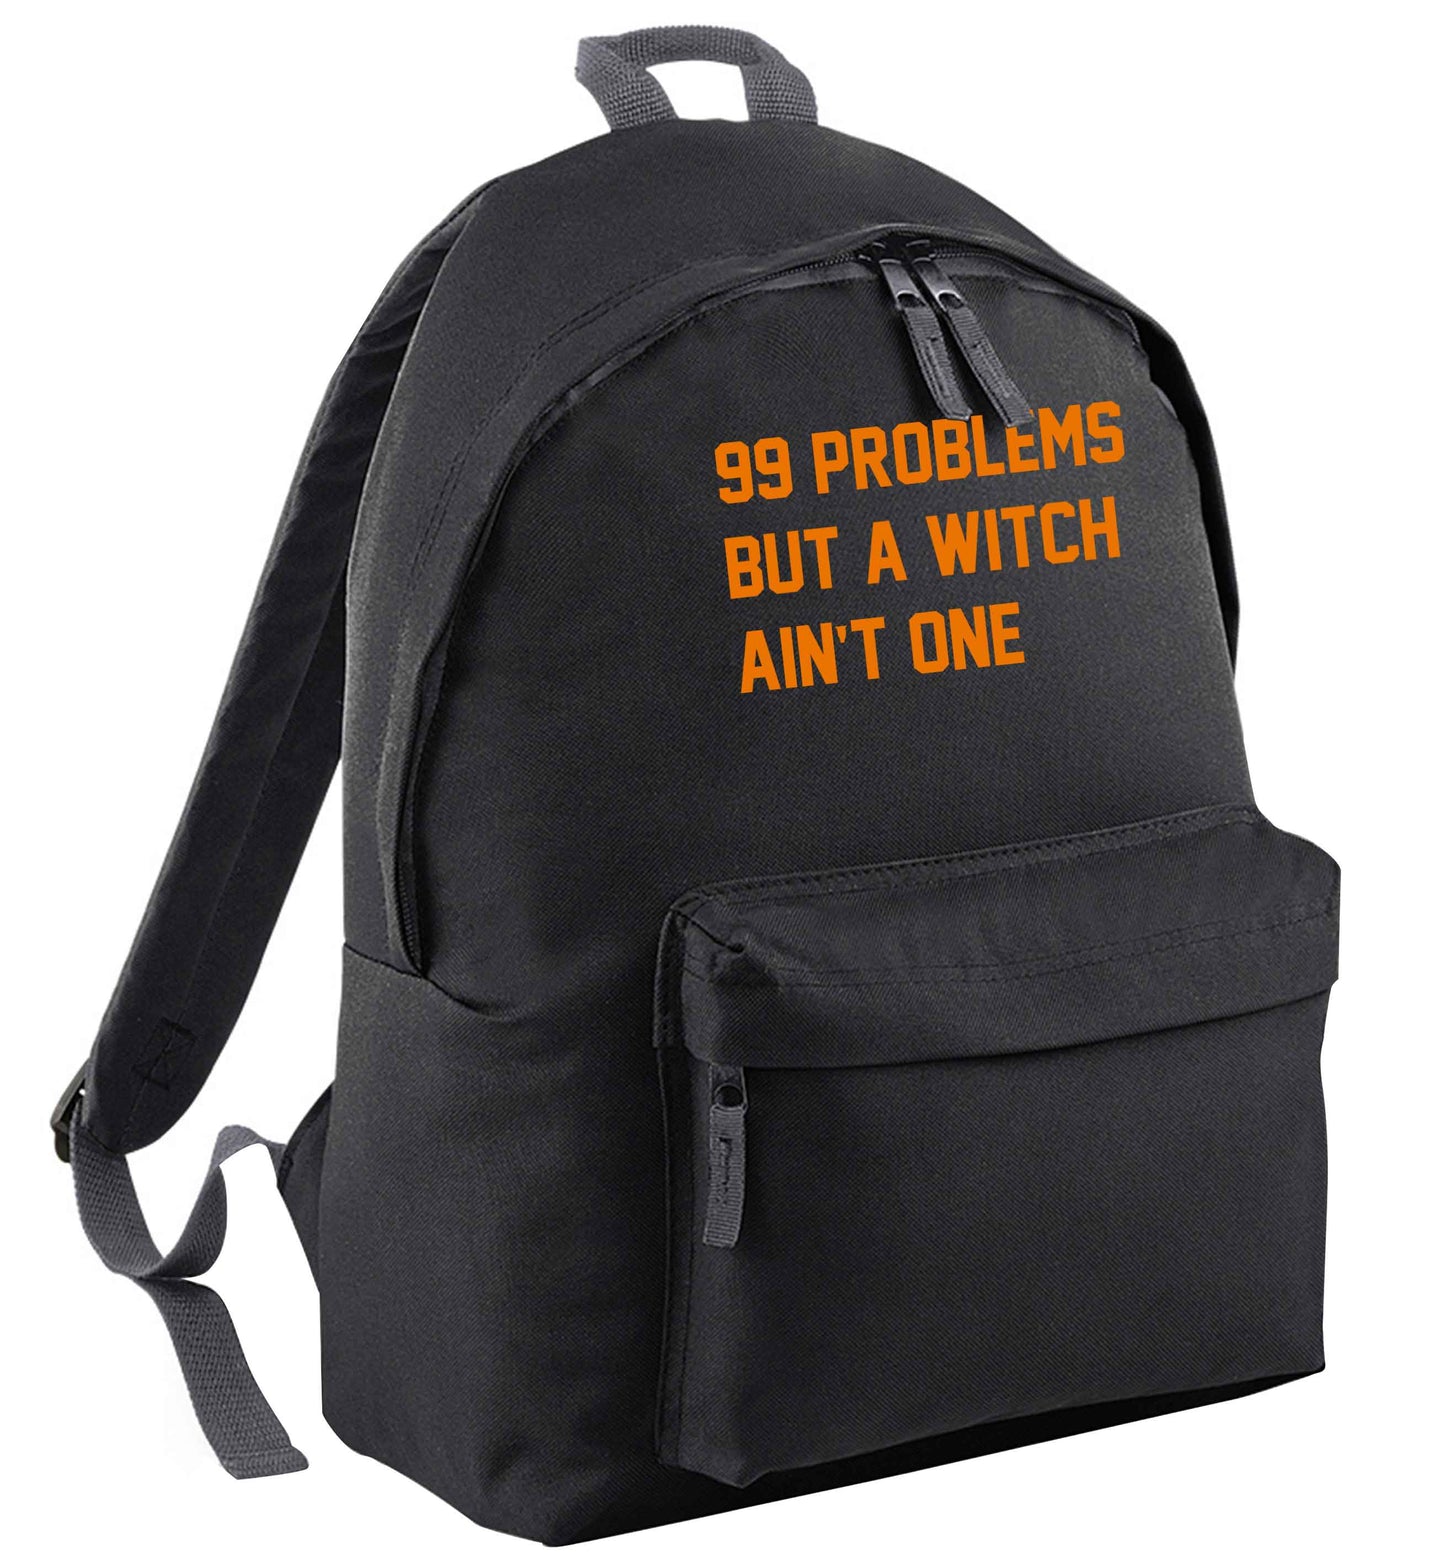 99 Problems but a witch aint one | Children's backpack